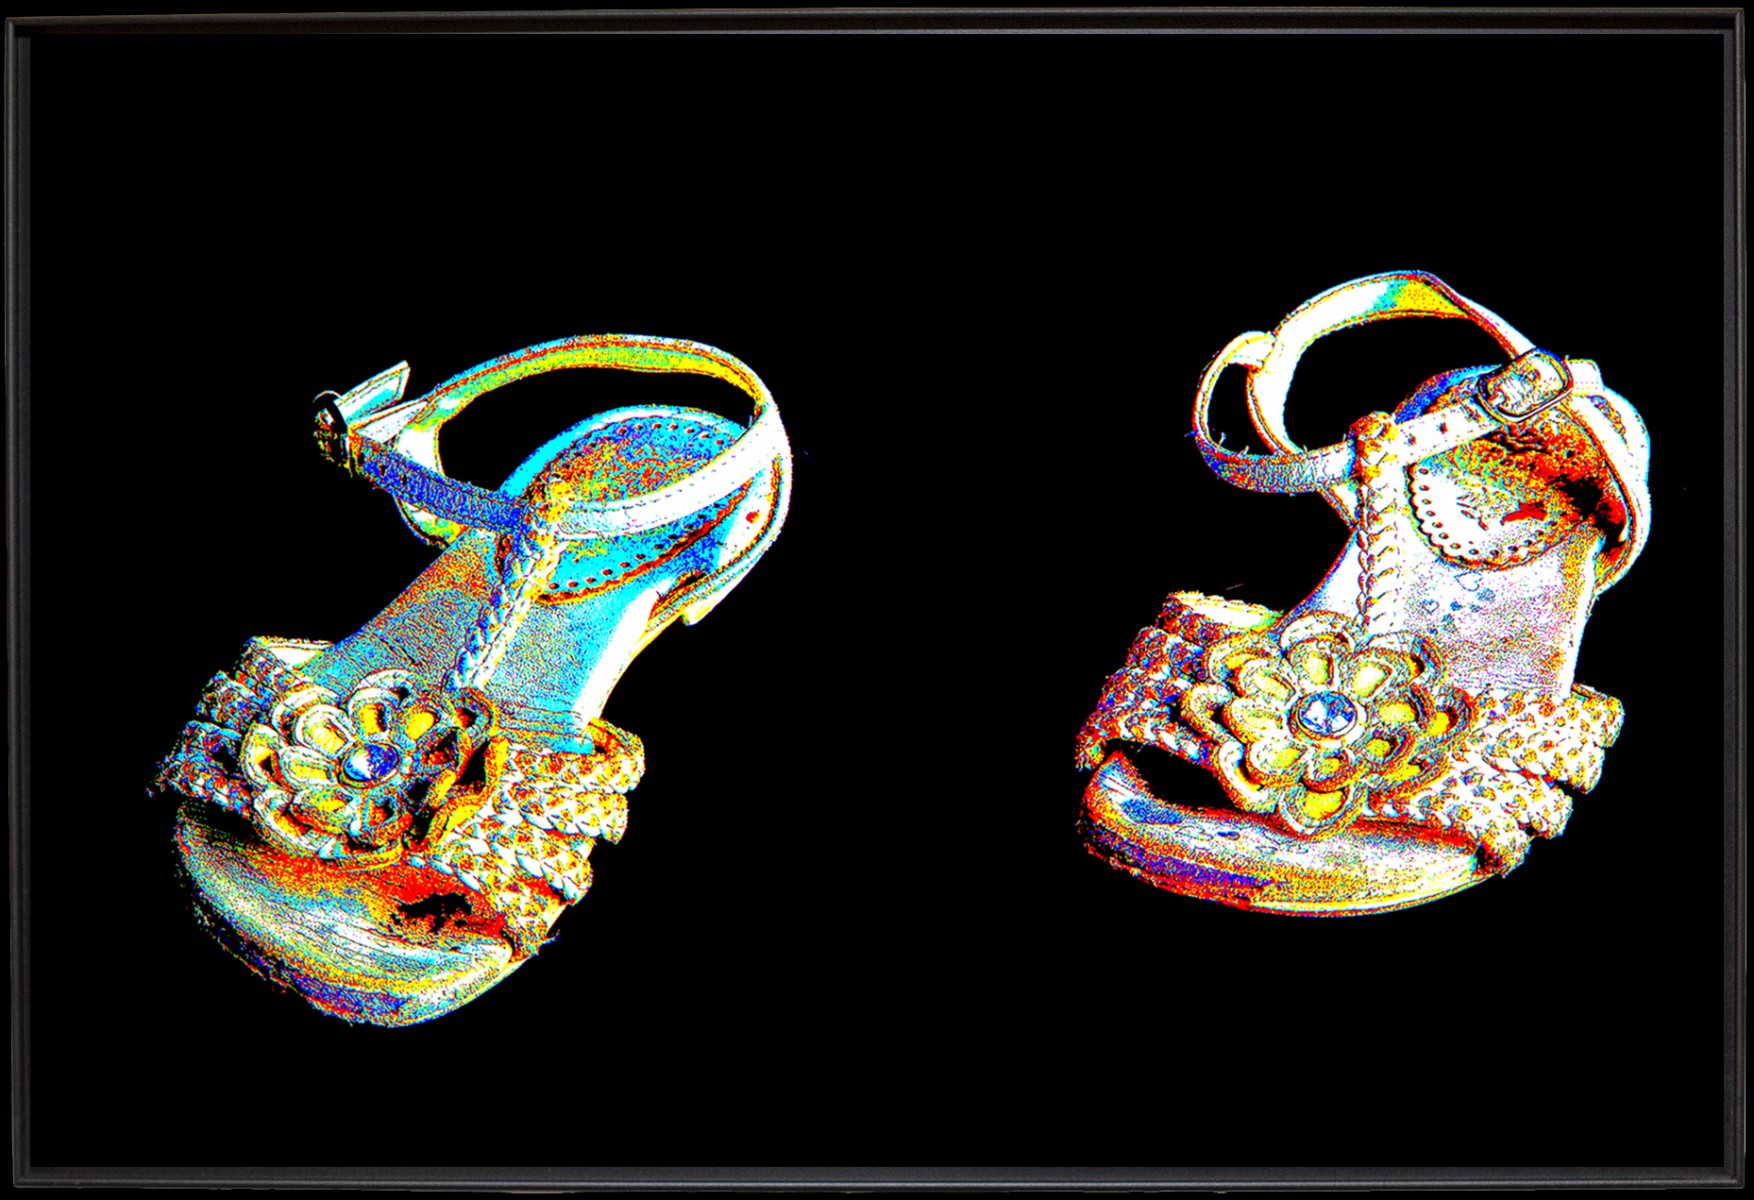 danielleaspis shoeshistoiredefamilleserie2f29 theartcycle photo_principale 395587024.jpeg The Art Cycle